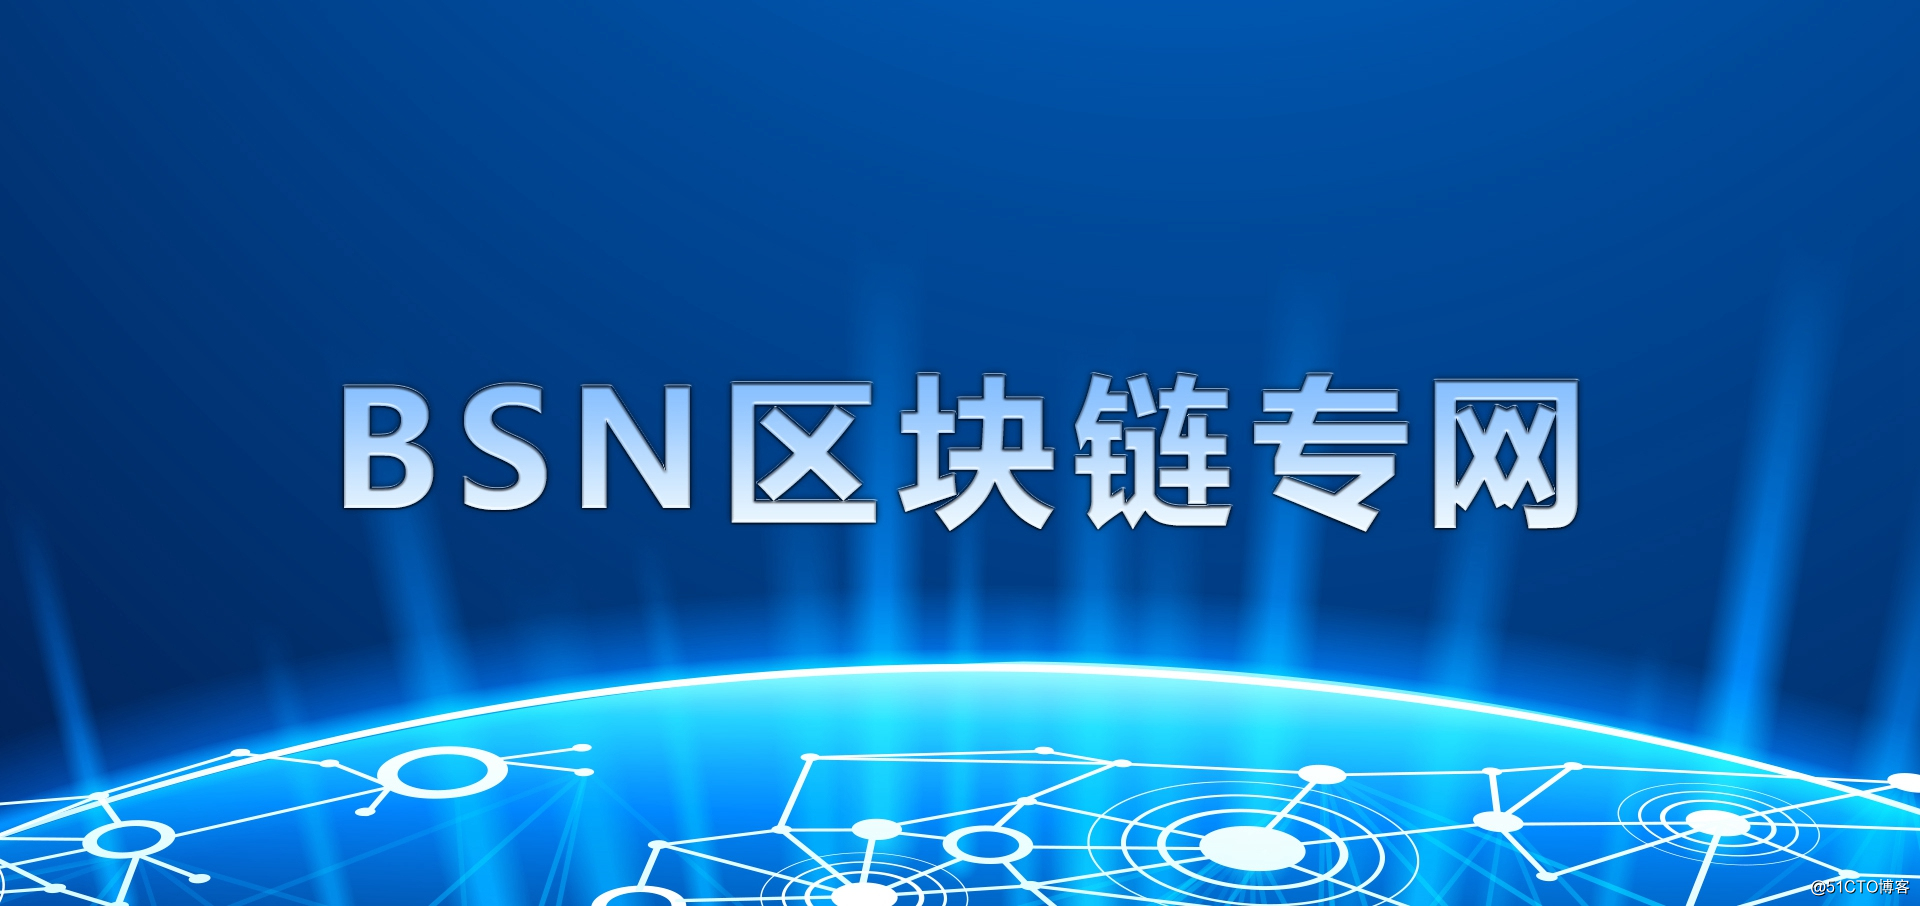 BSN block chain private network products released .jpg